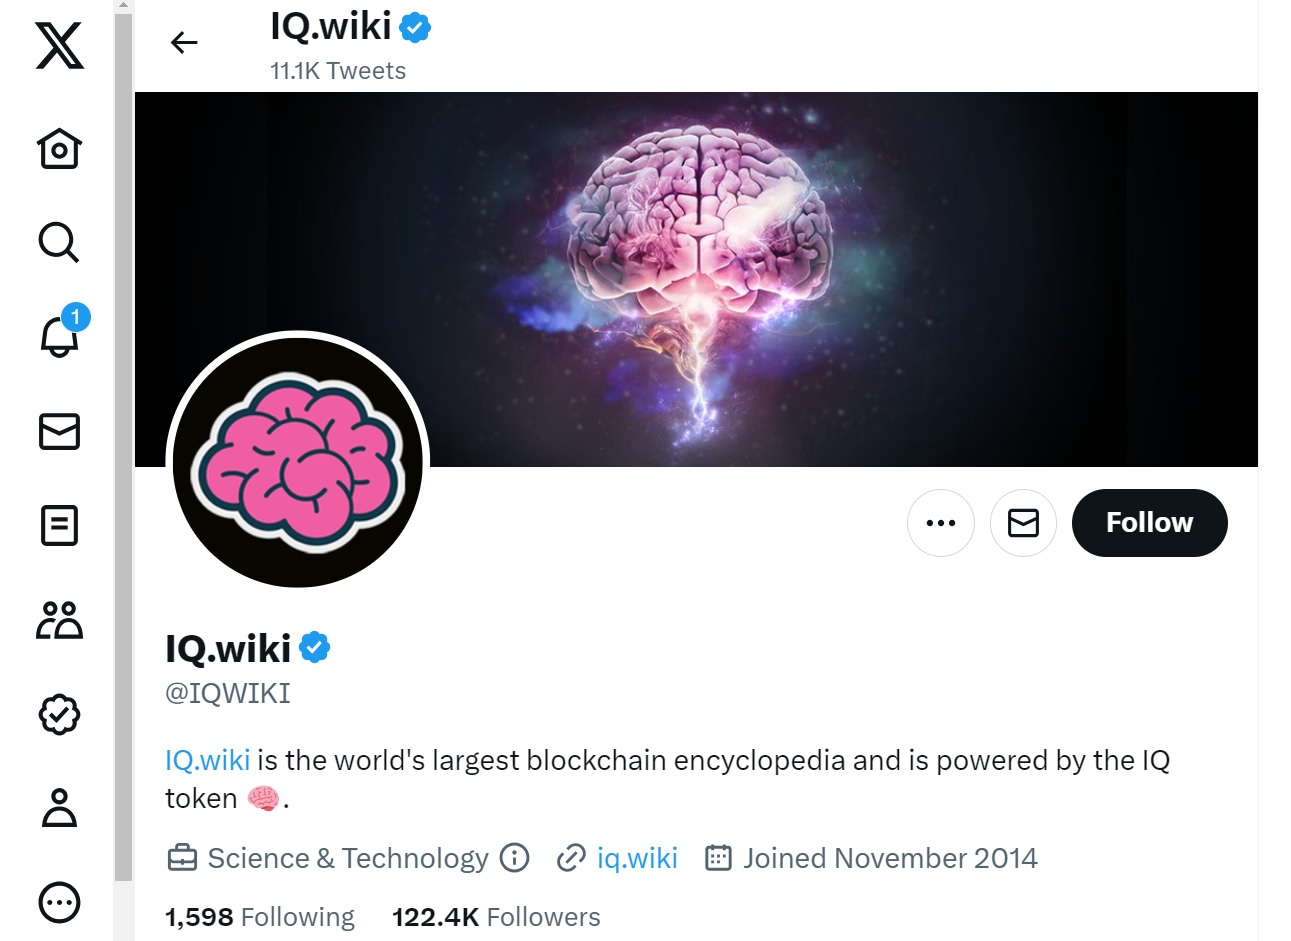 IQ crypto official X (formerly Twitter) account page